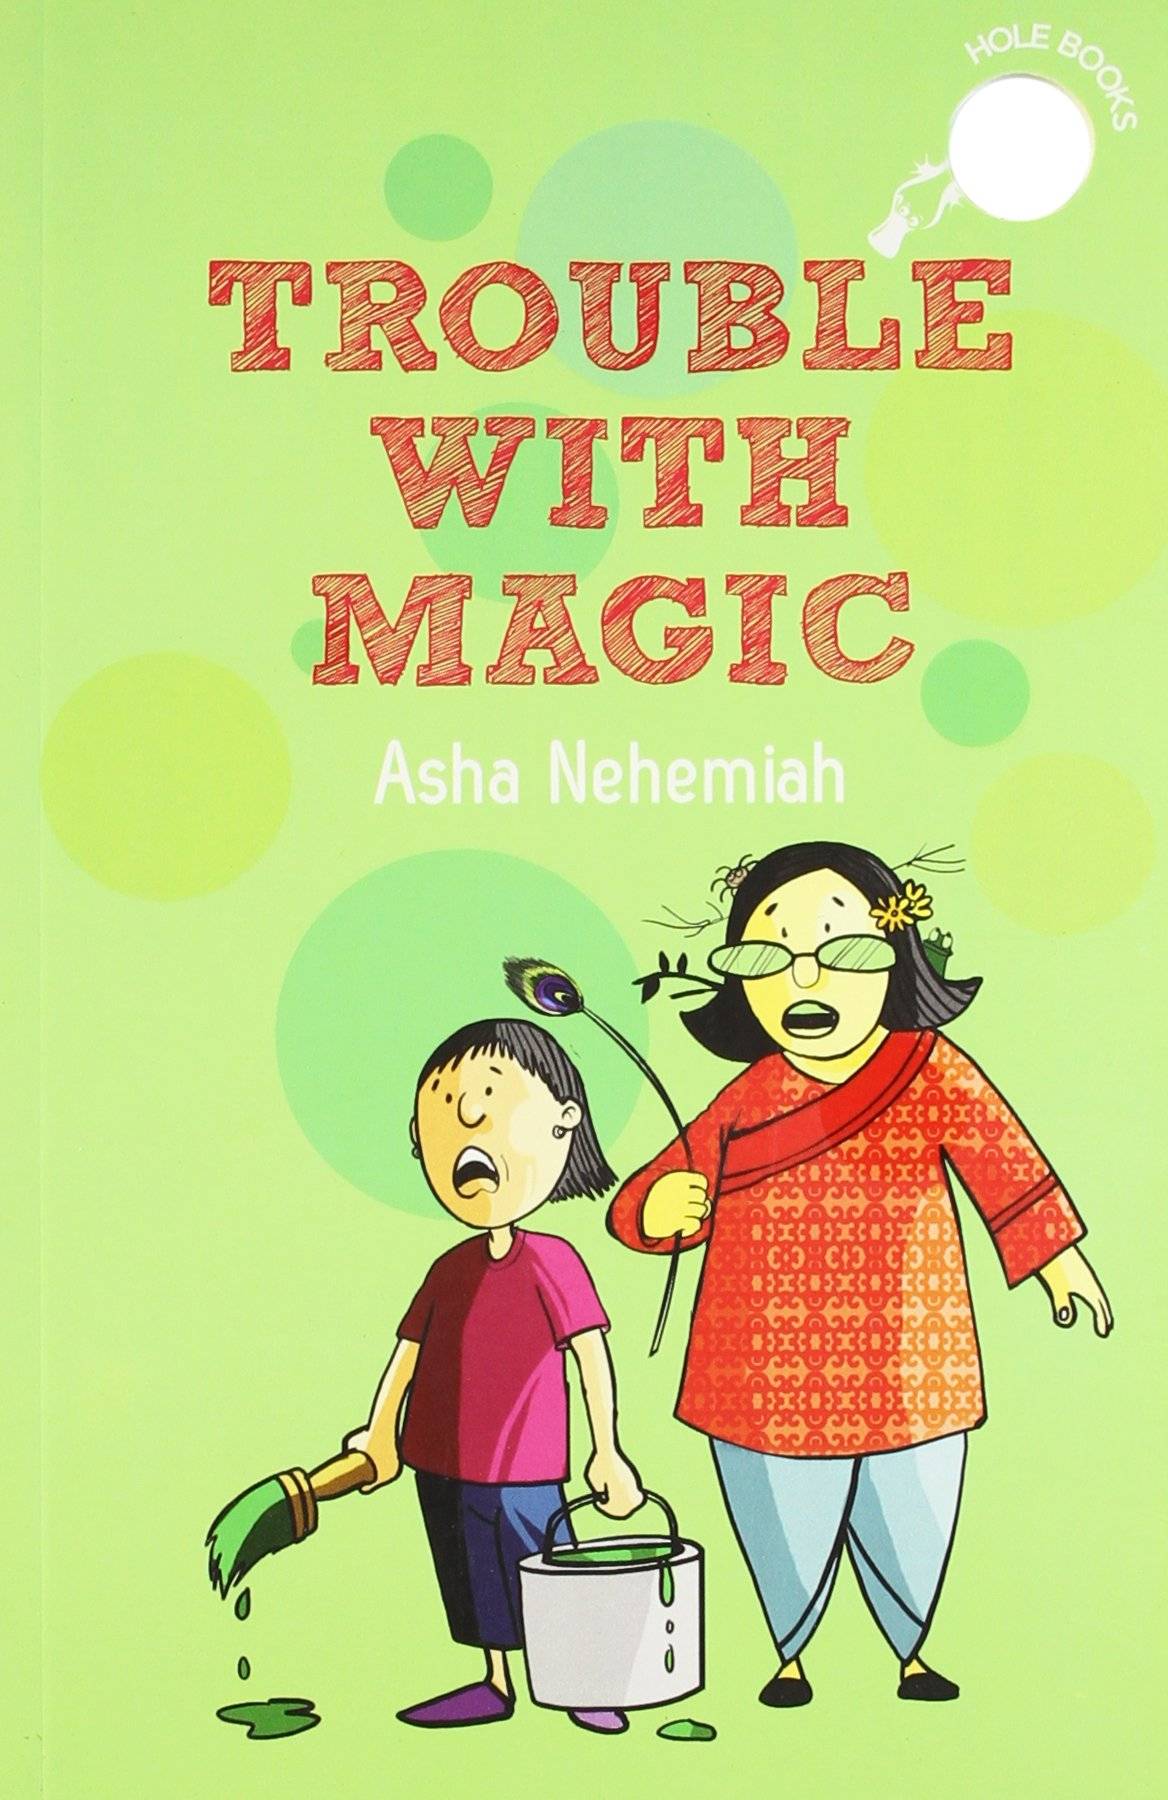 IMG : Hole book-Trouble with Magic